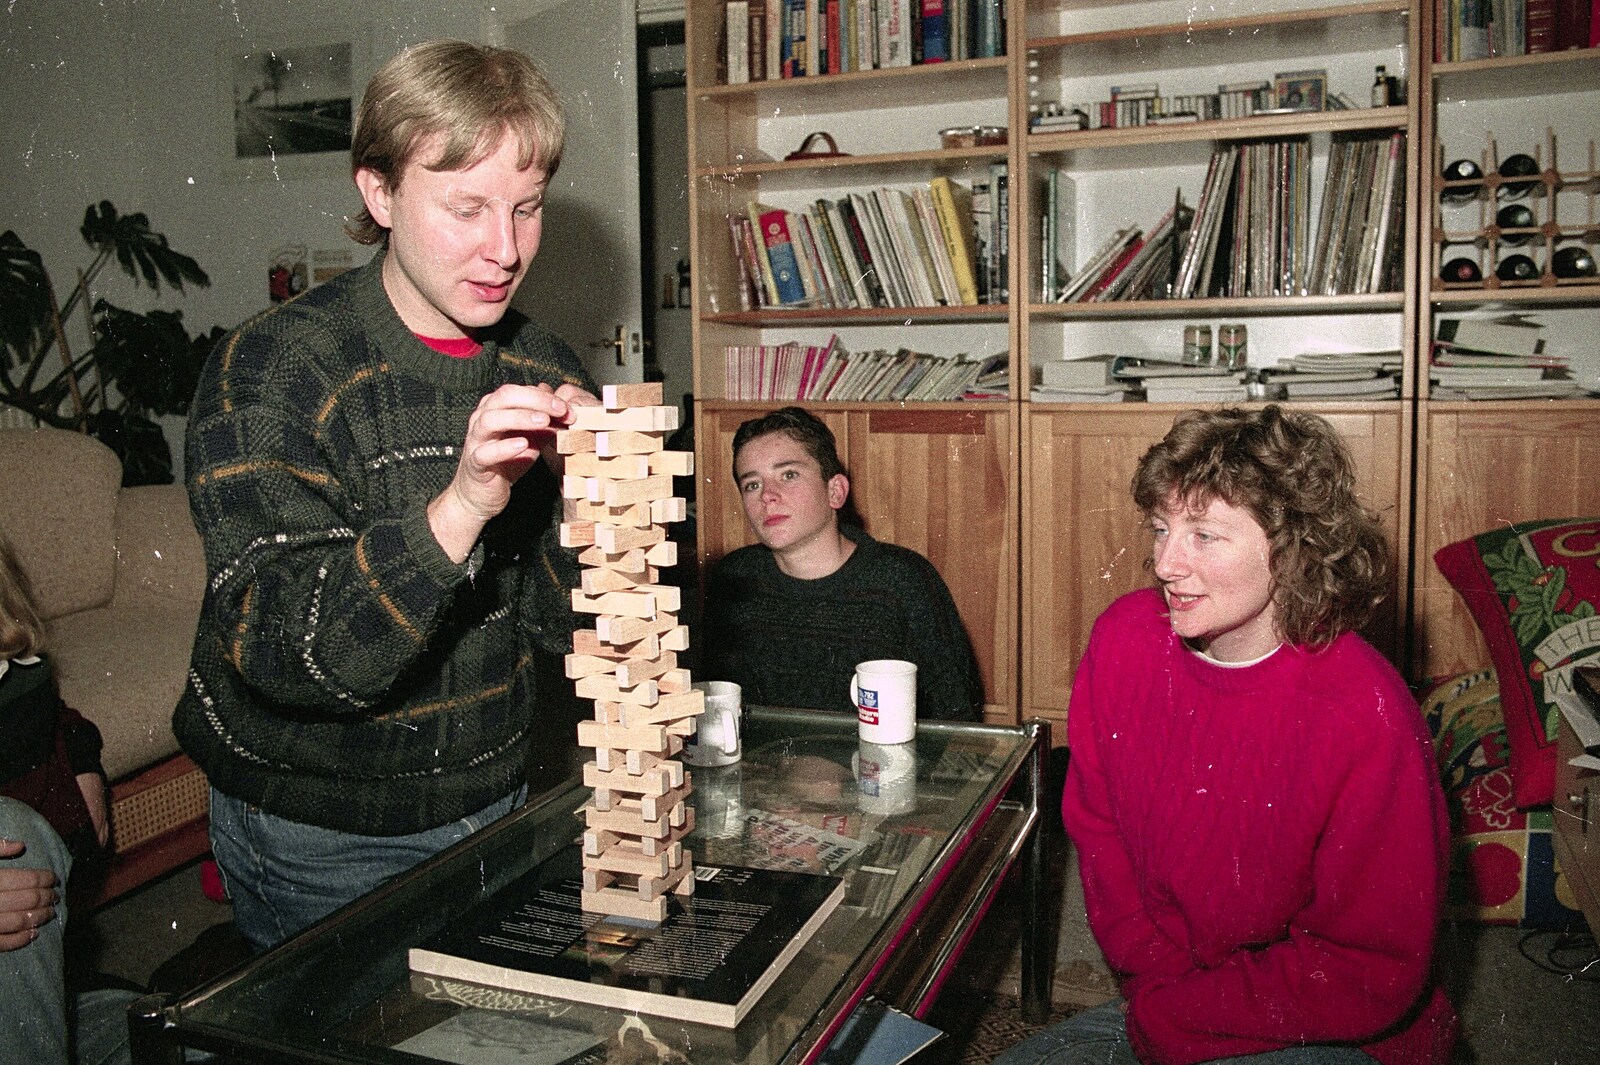 Another Jenga move from Darts at the Swan Inn and a Nigel Party, Lancaster Gate - 23rd March 1991